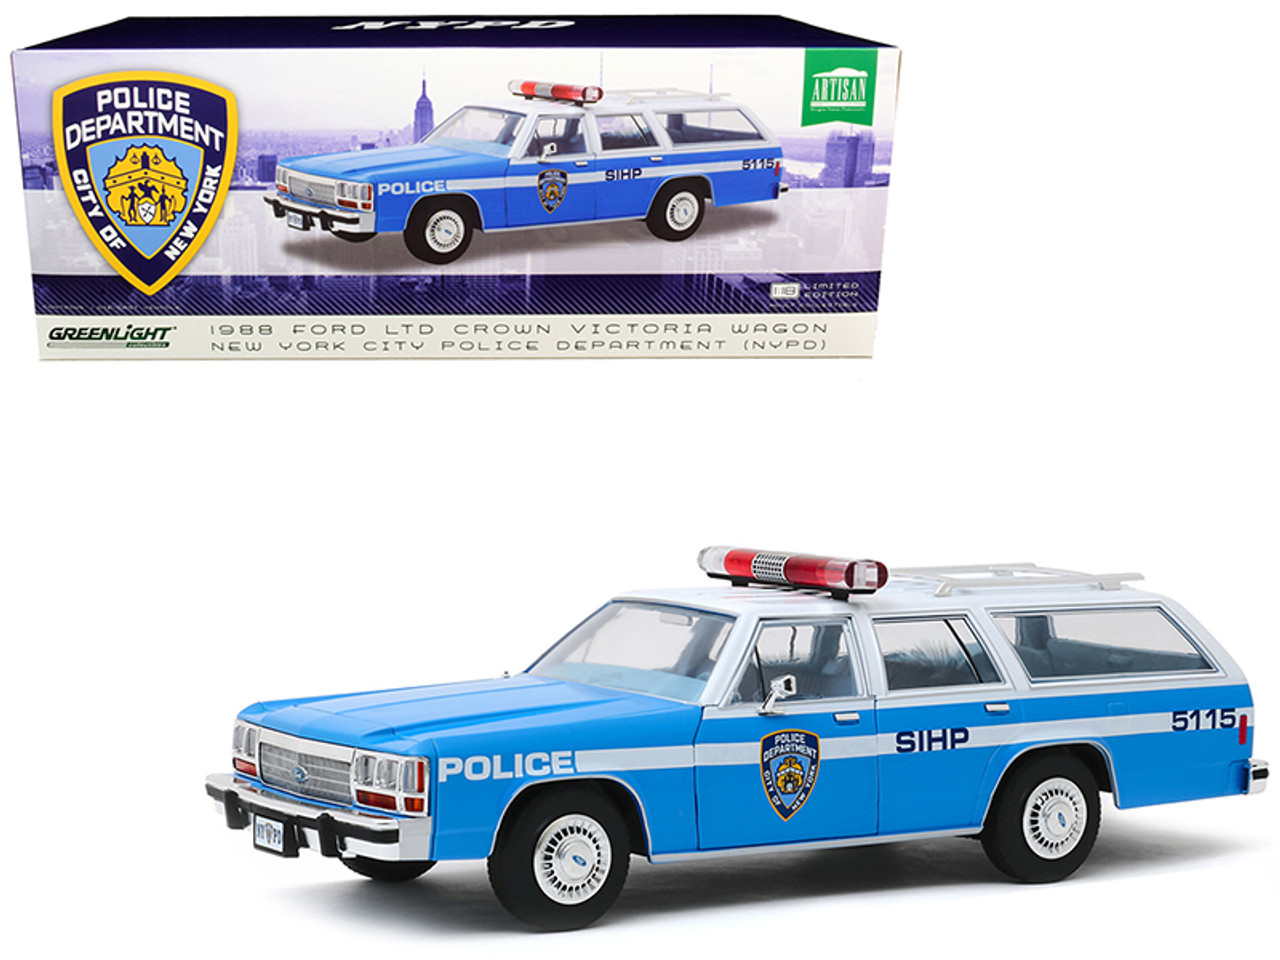 1988 Ford LTD Crown Victoria Wagon "NYPD" (New York City Police Department) Light Blue and White 1/18 Diecast Model Car by Greenlight